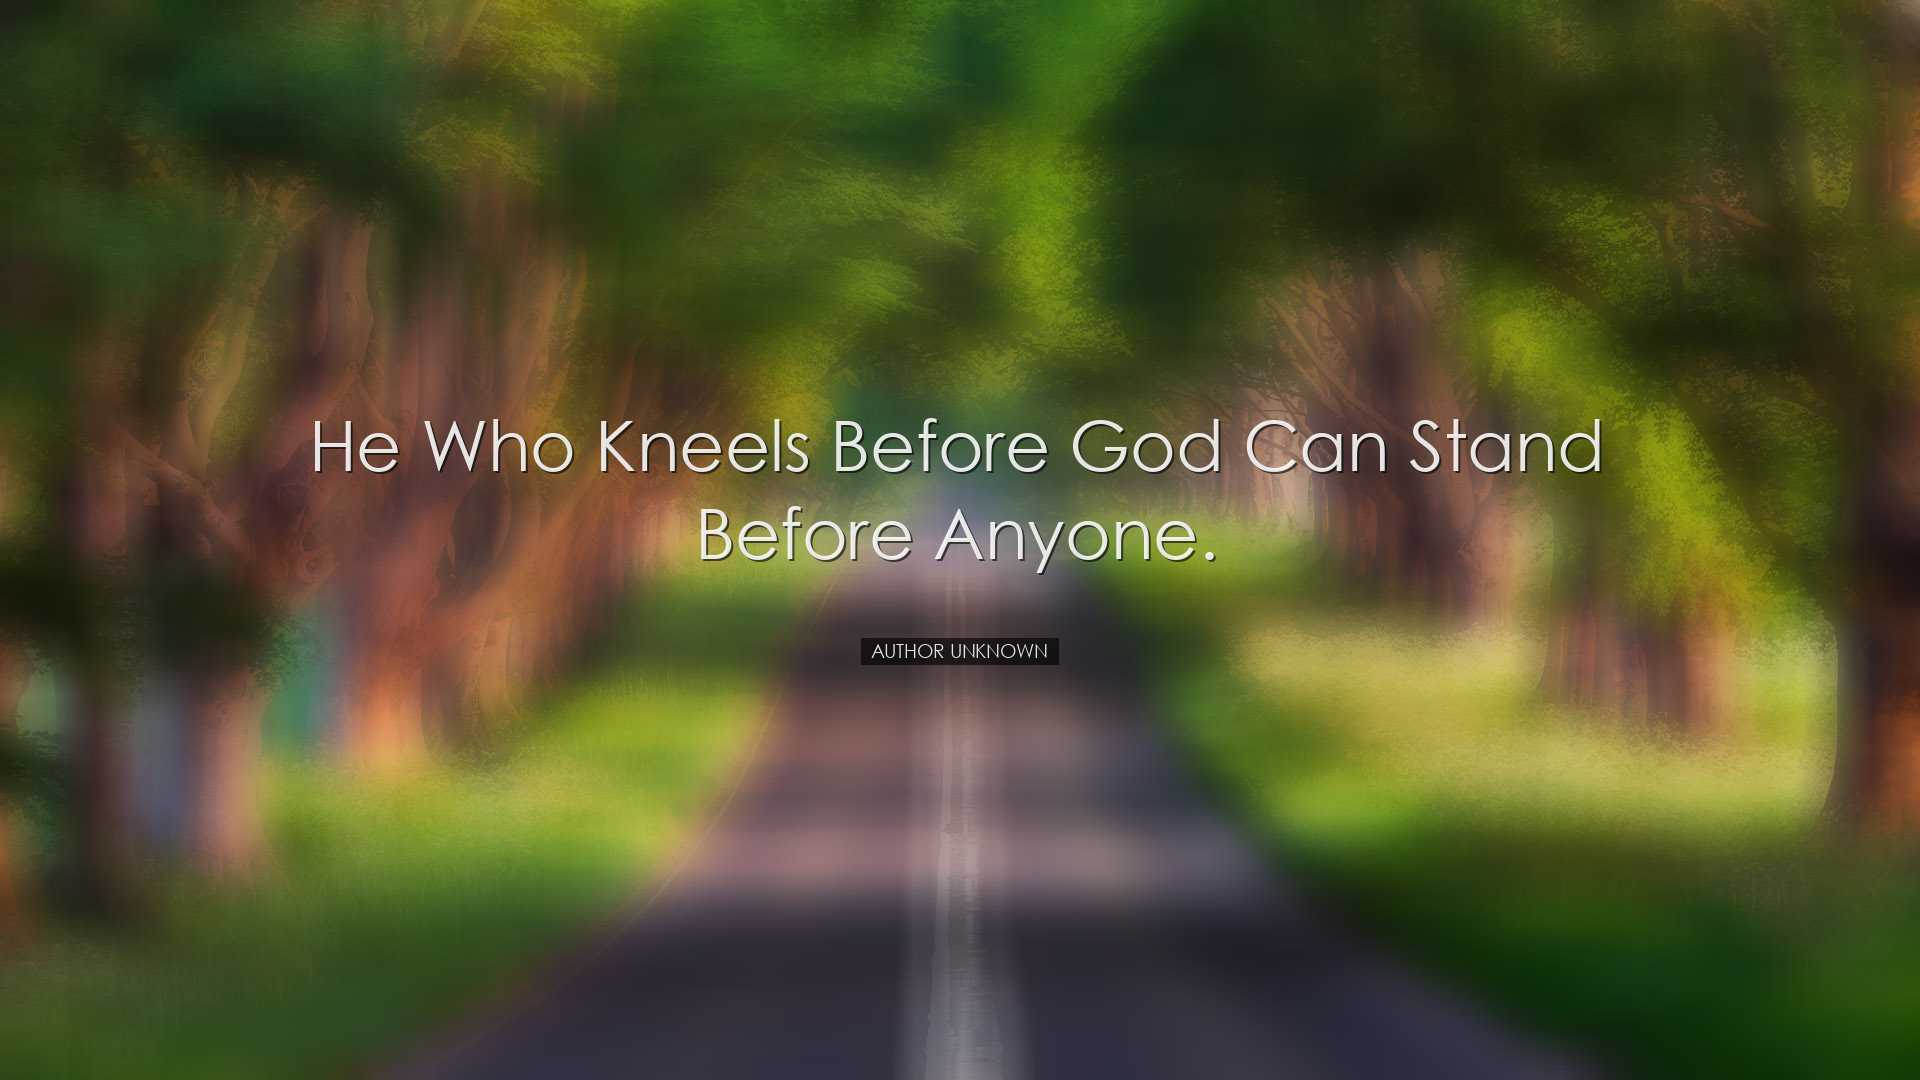 He who kneels before God can stand before anyone. - Author Unknown